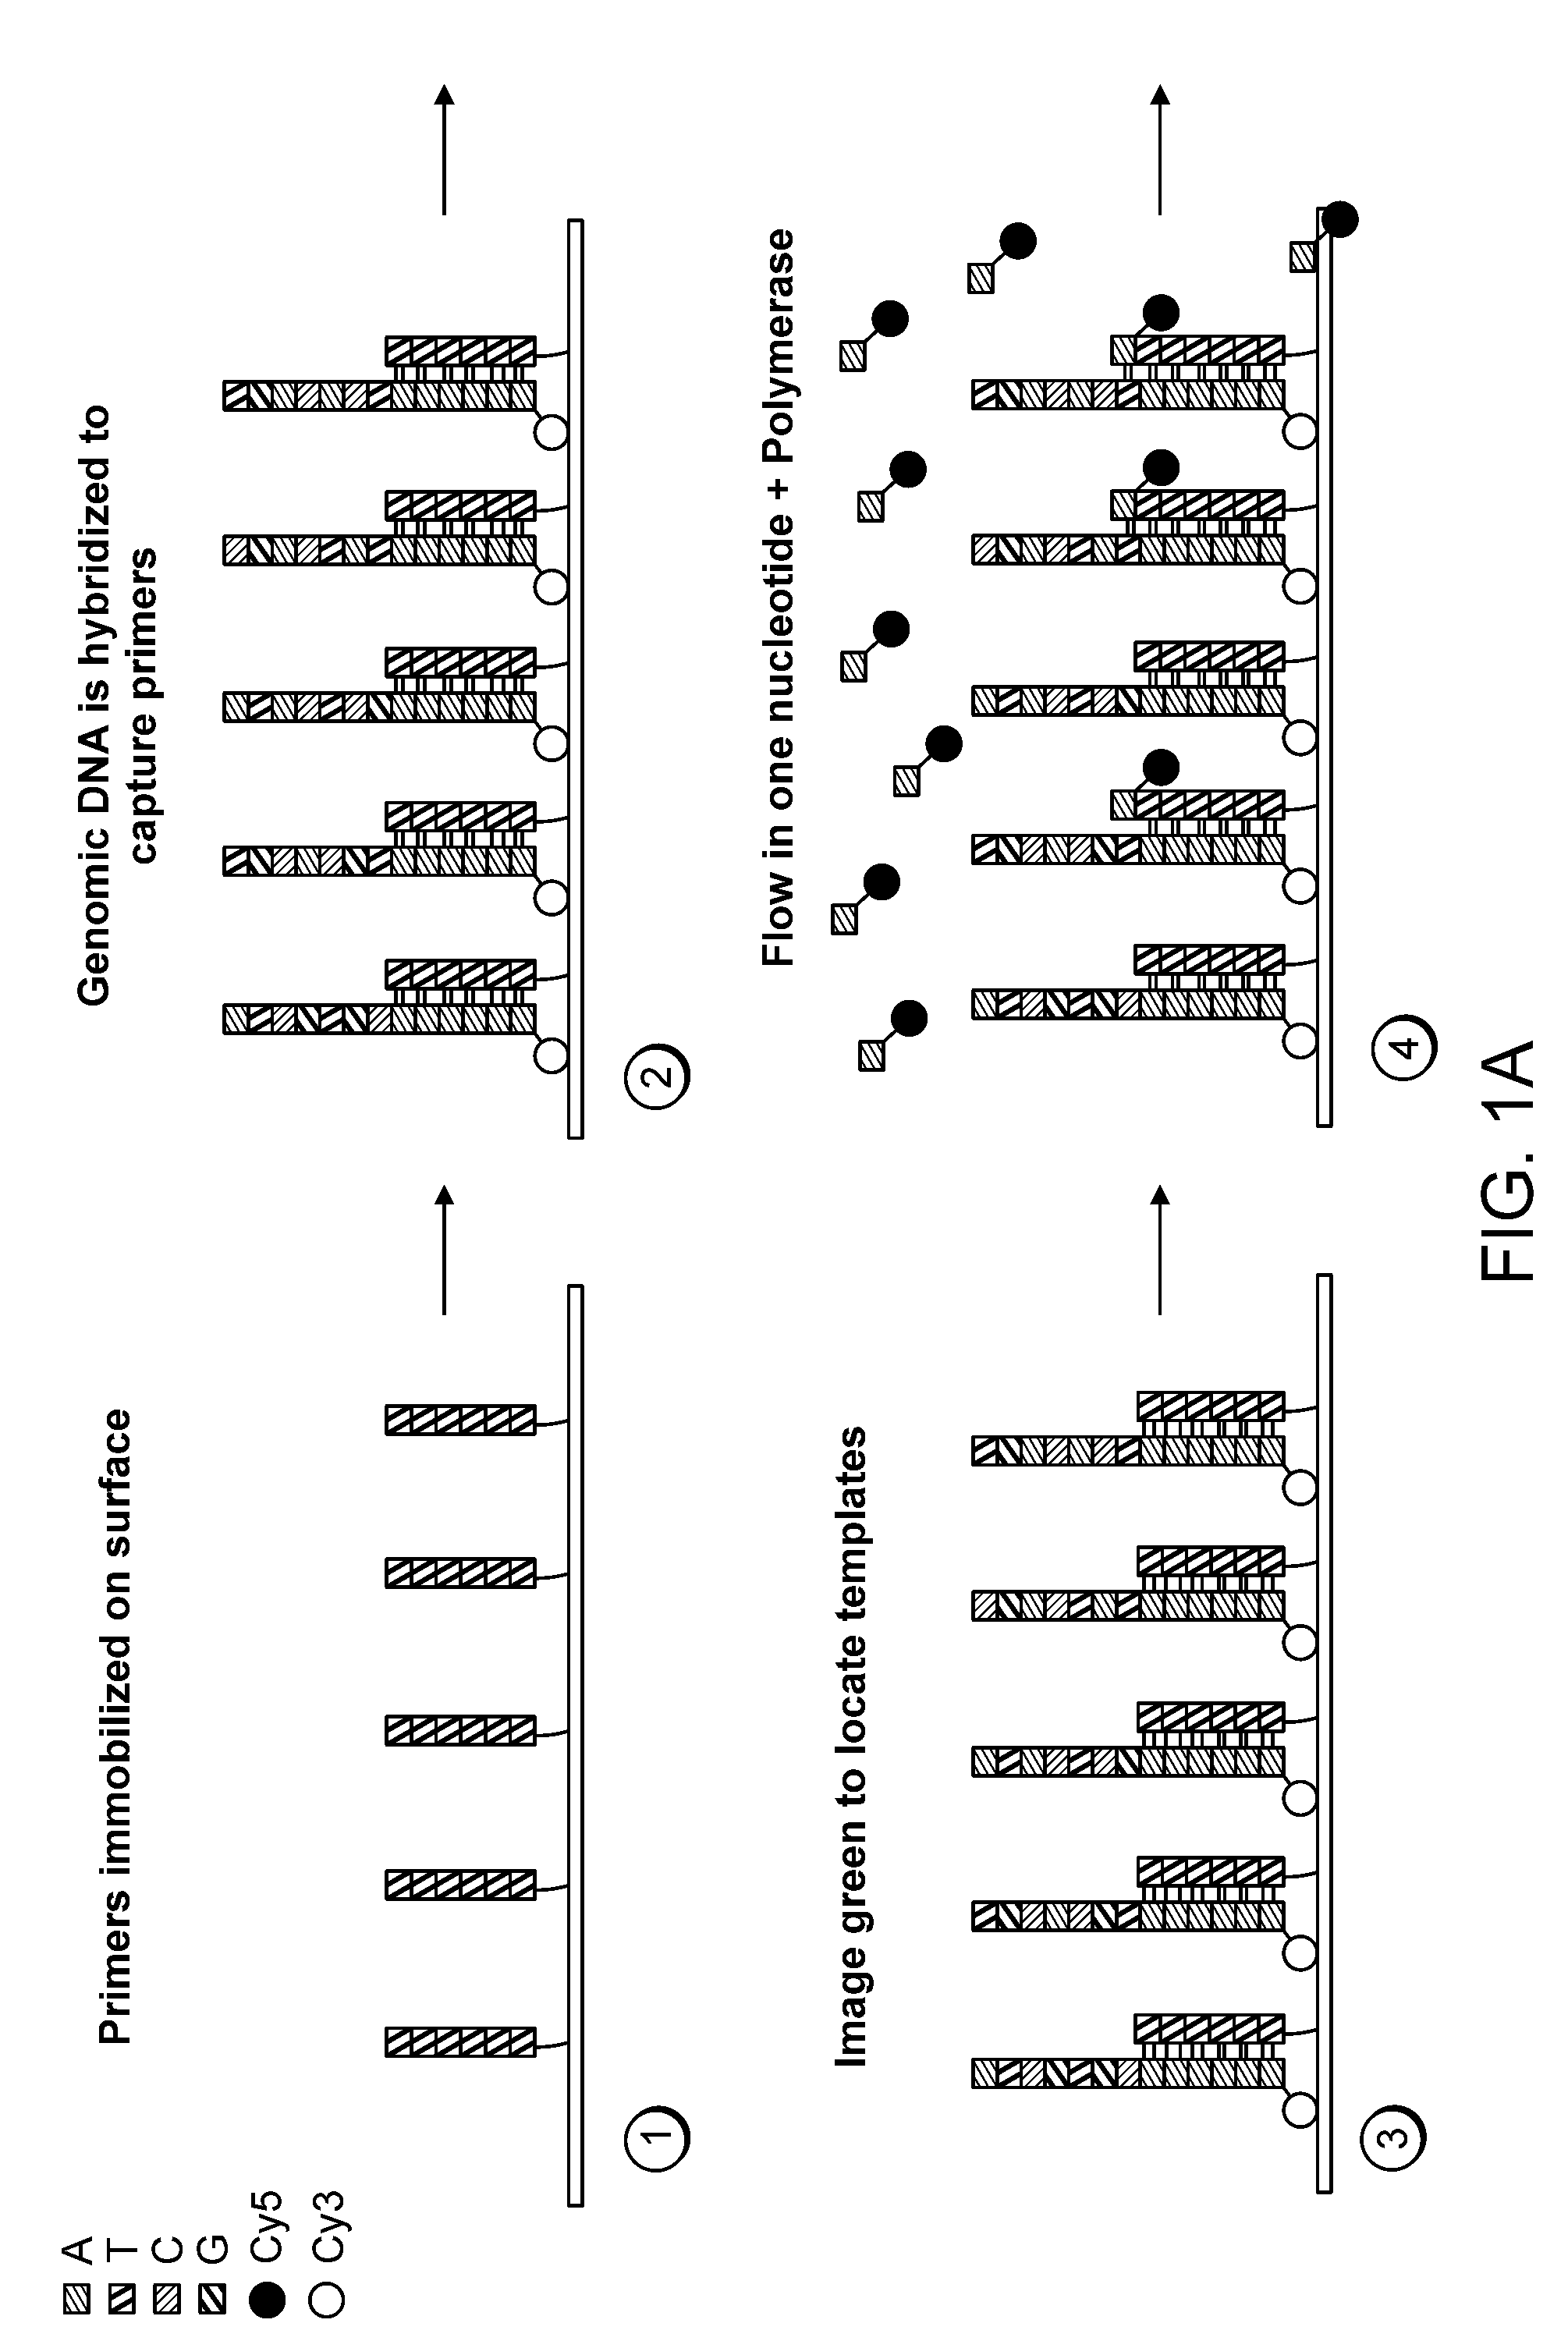 Paired-end reads in sequencing by synthesis